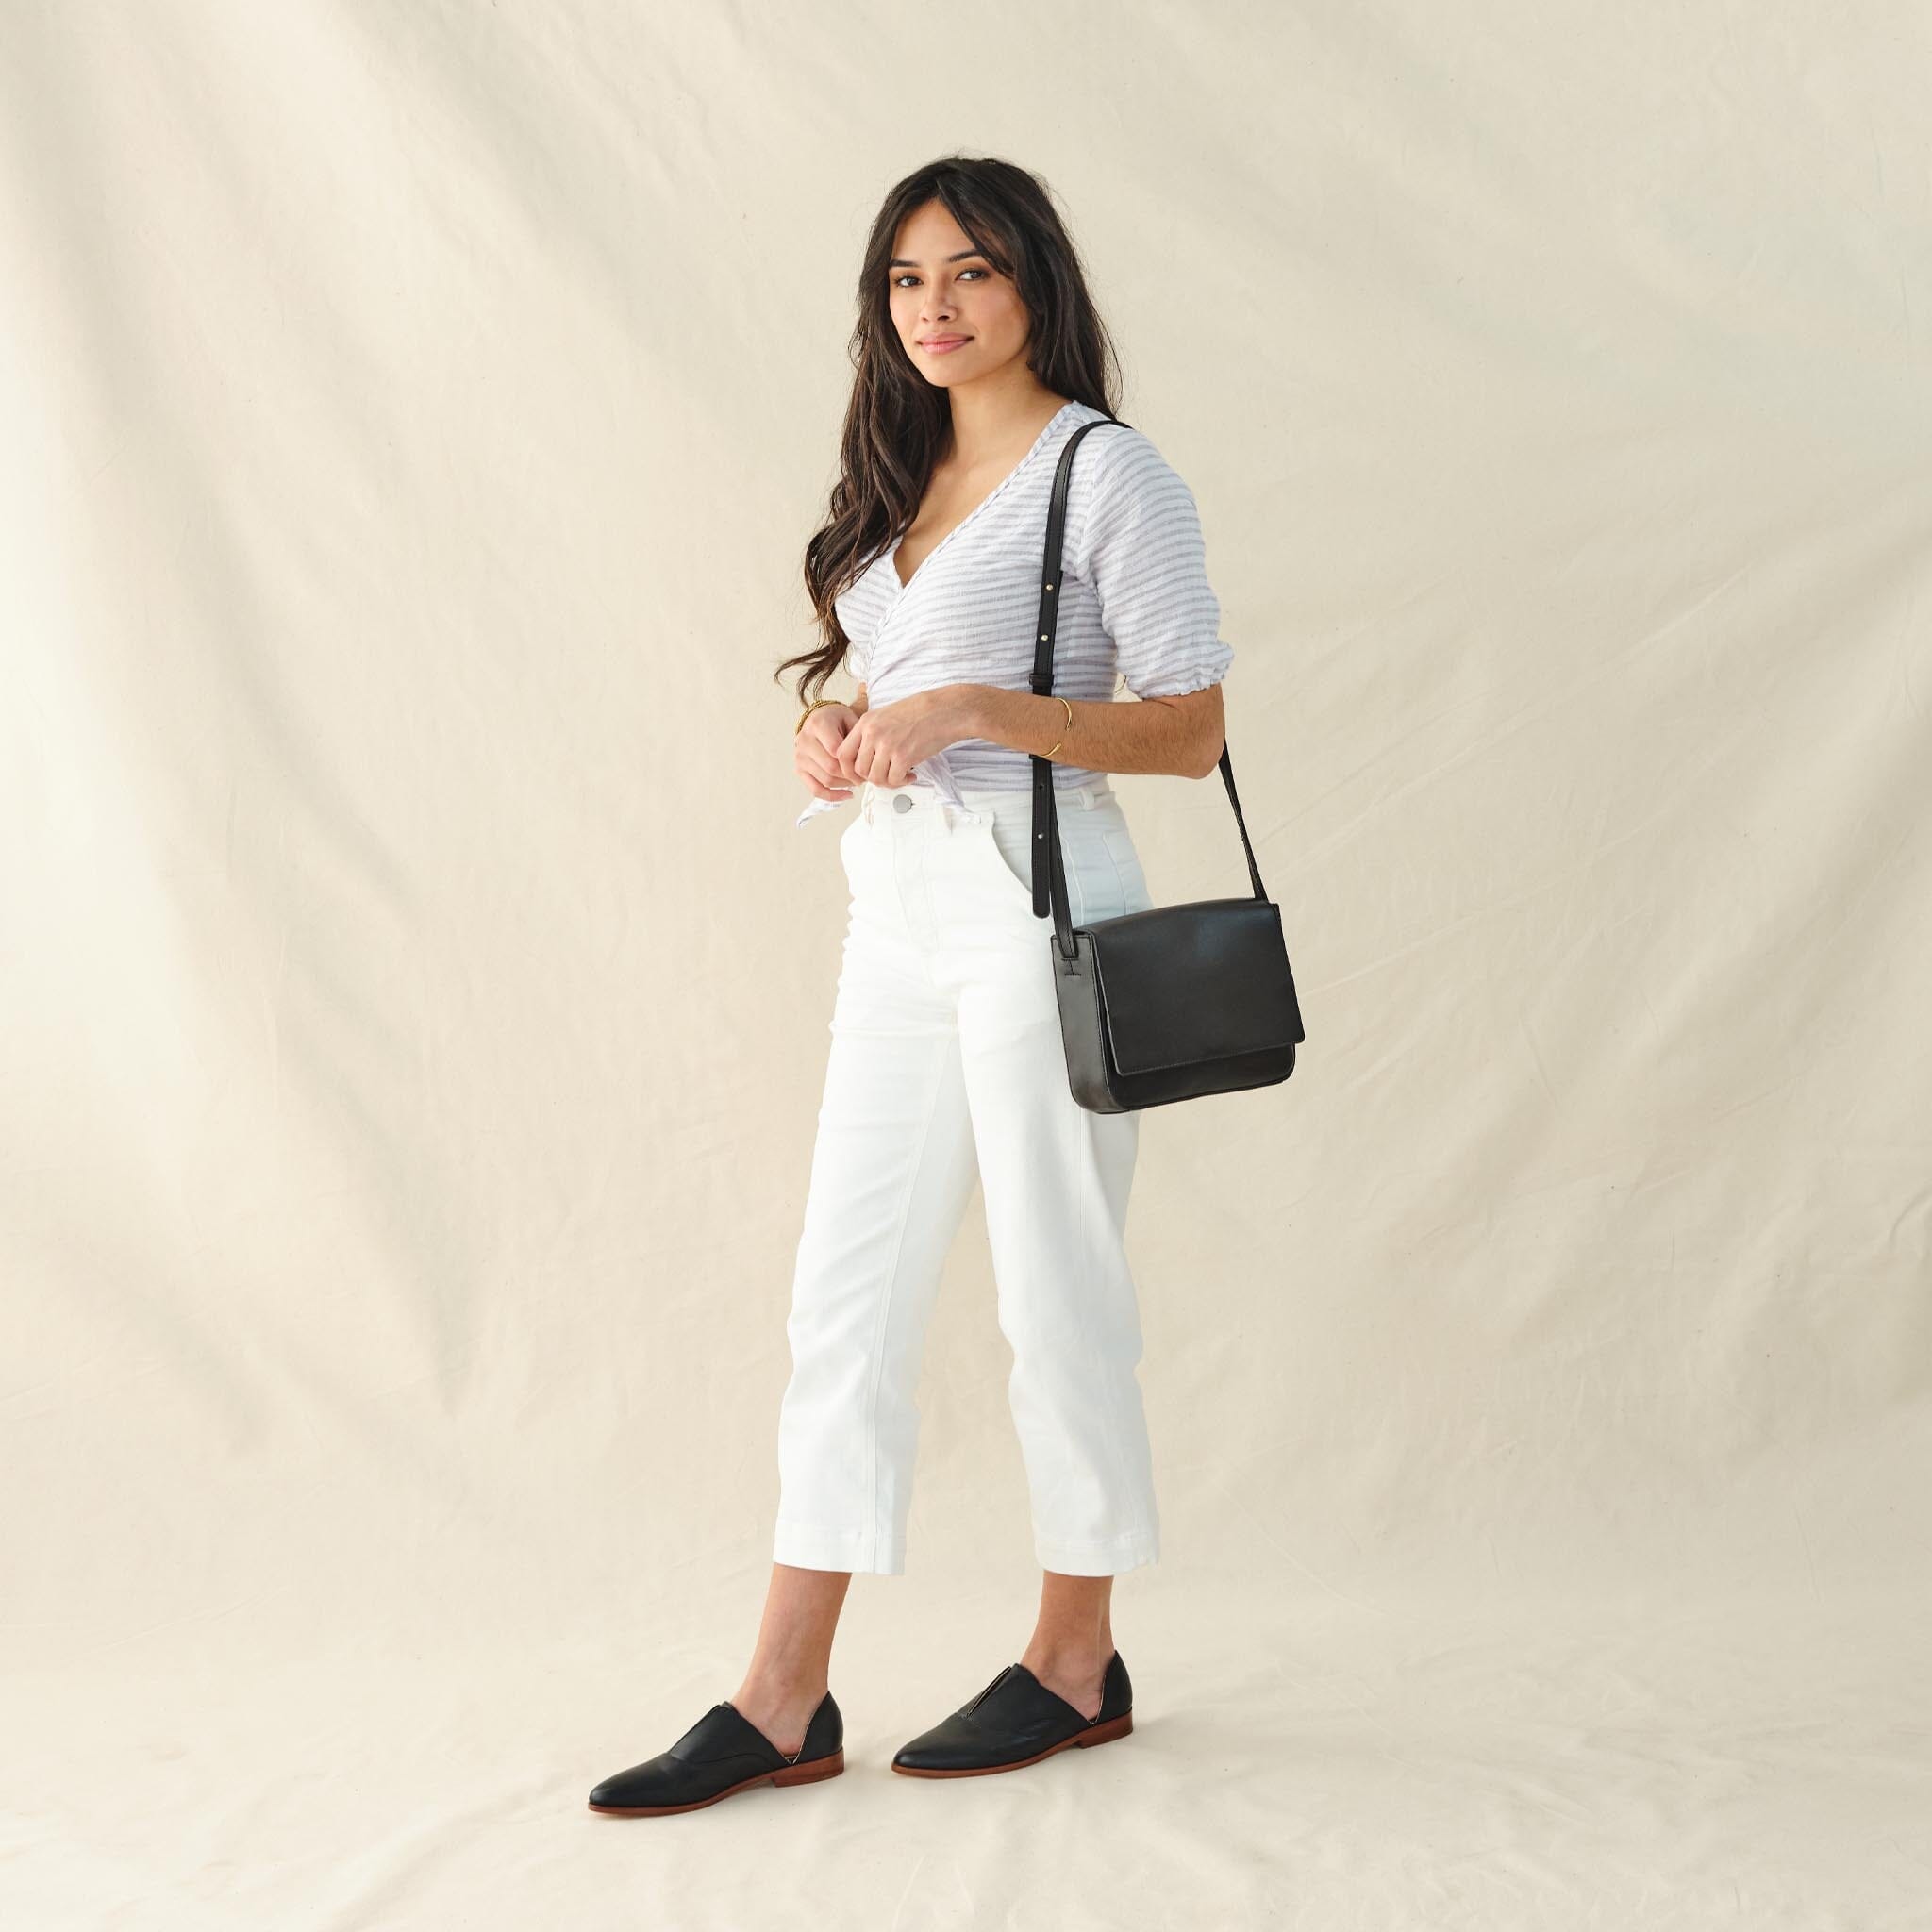 The Perfect Black Work Pant - star-crossed smile